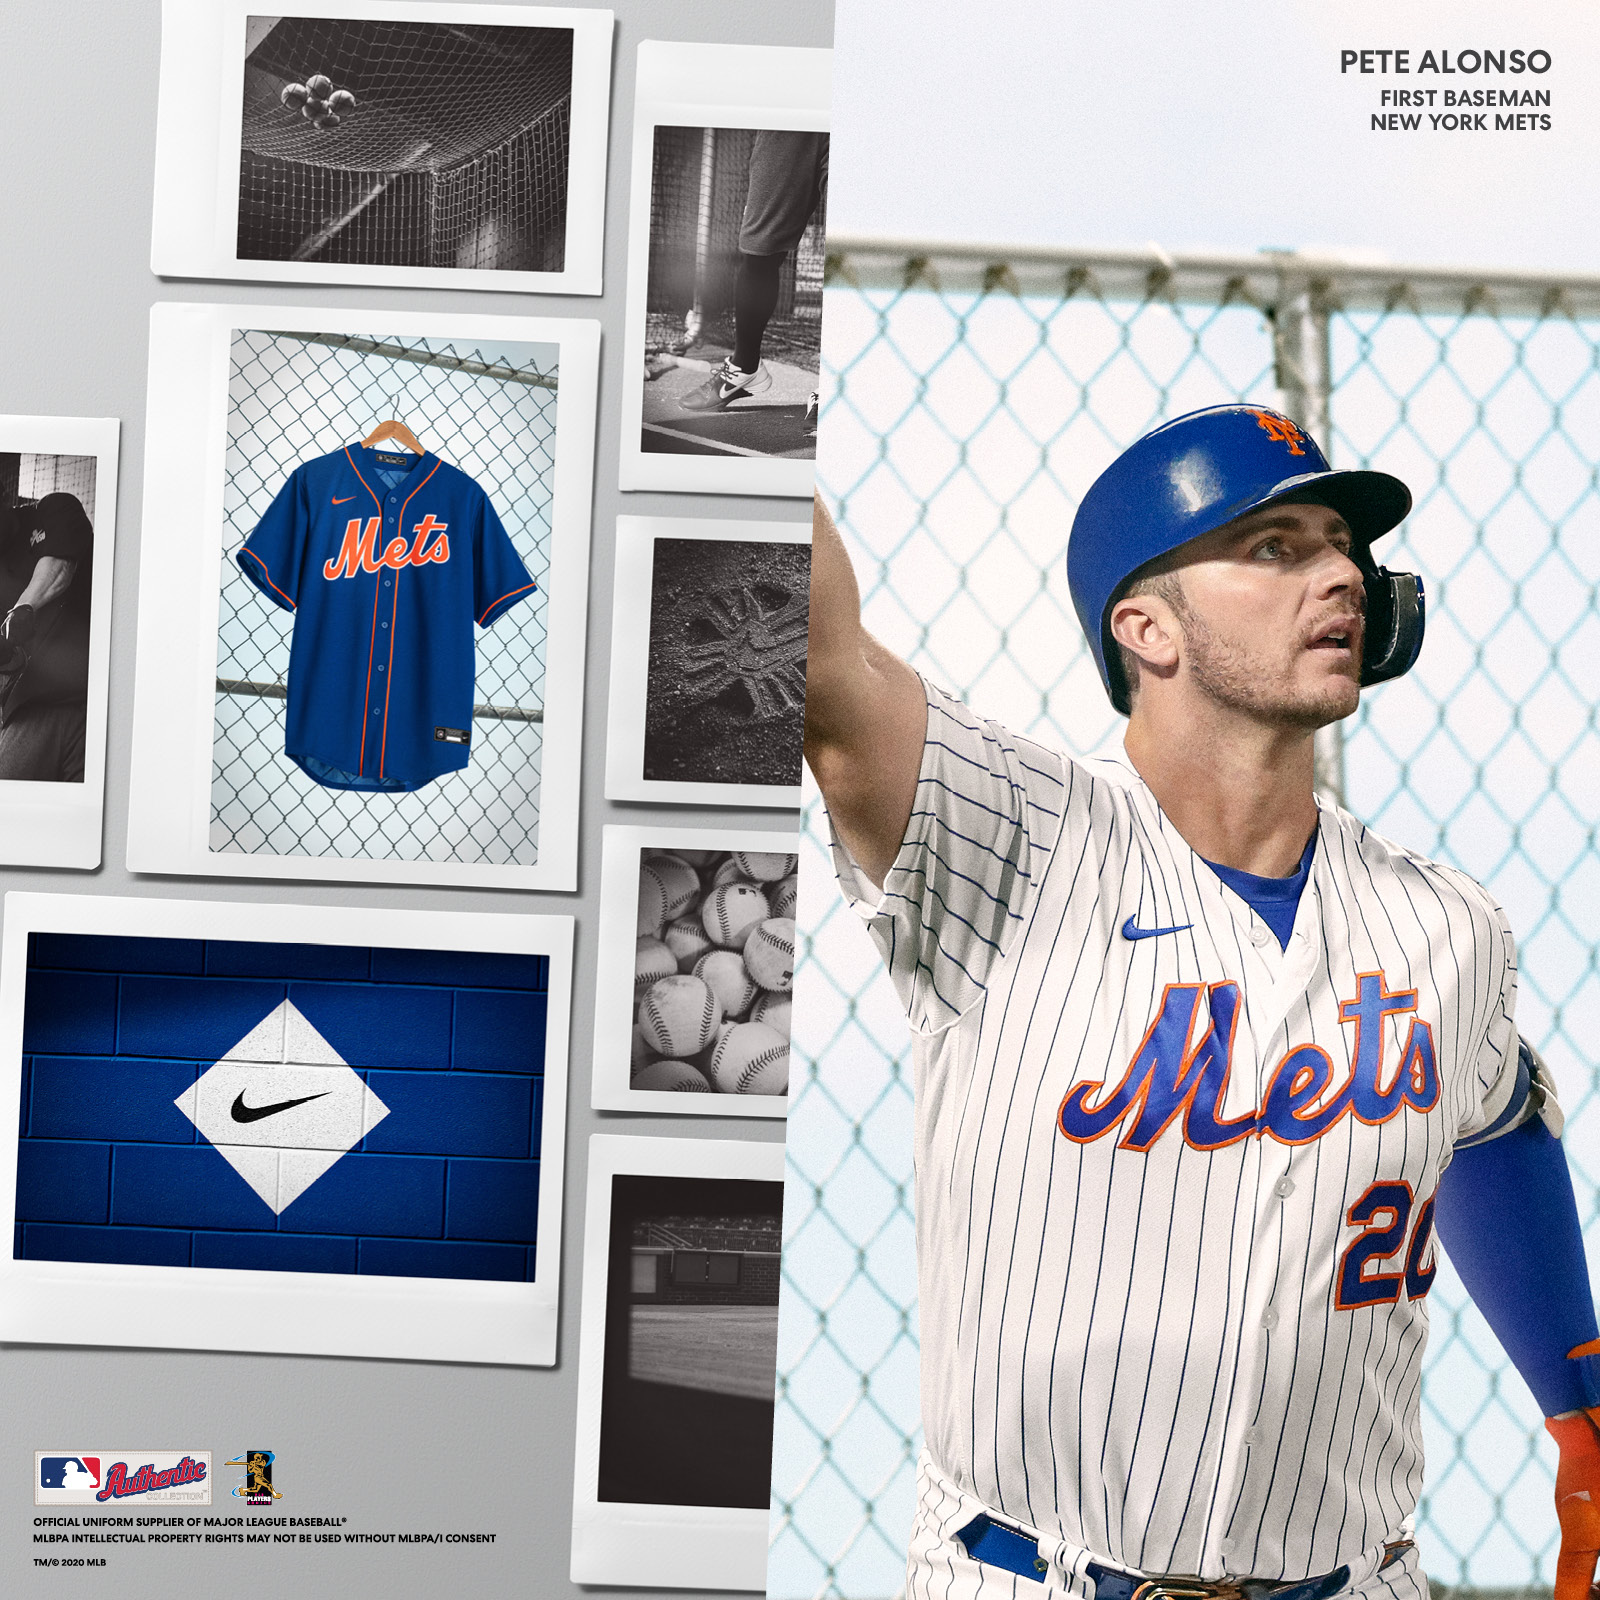 Nike MLB Jerseys Are Here - Lids